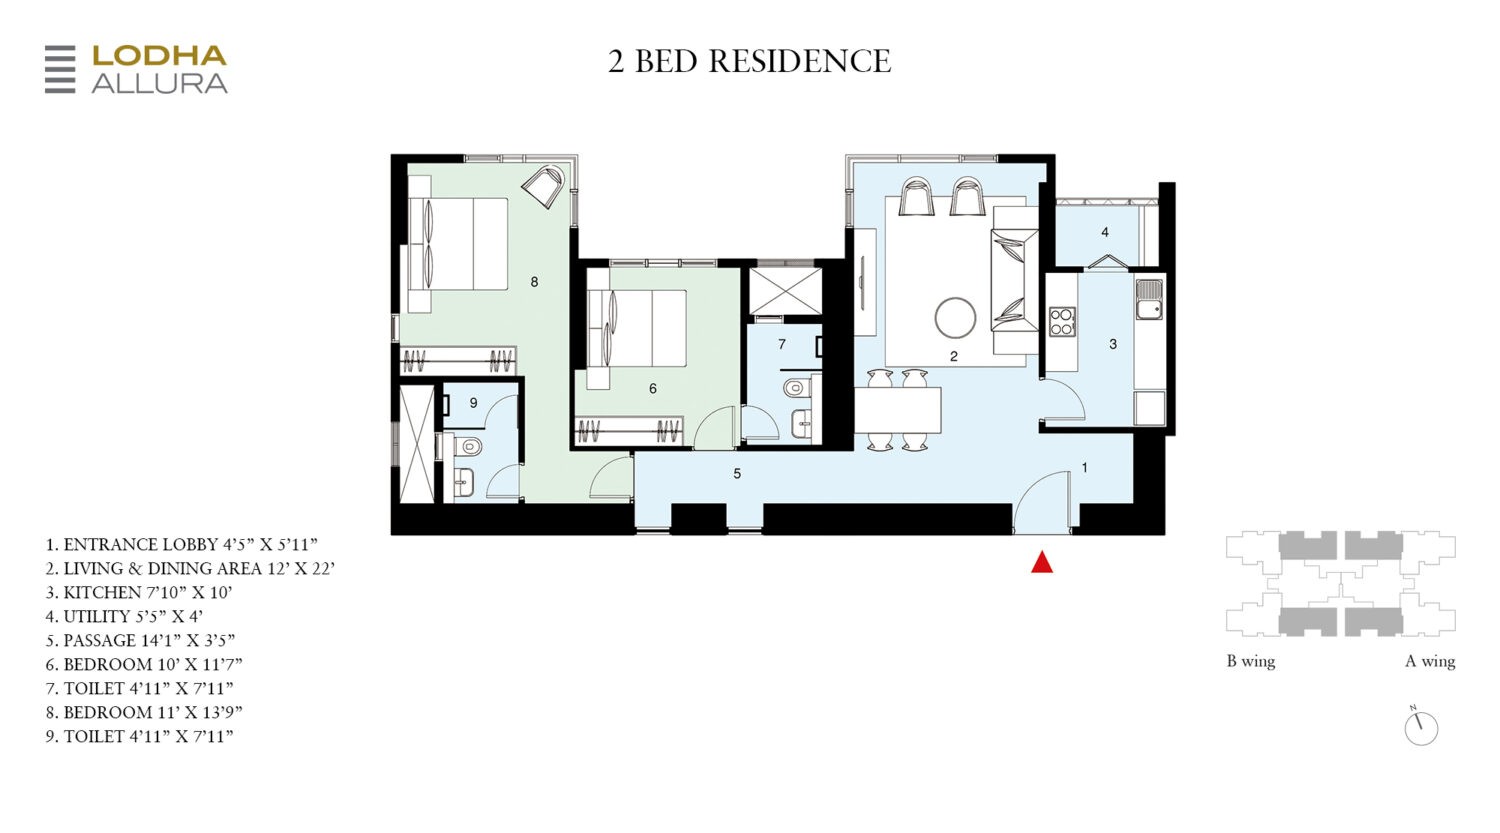 2 BED RESIDENCE